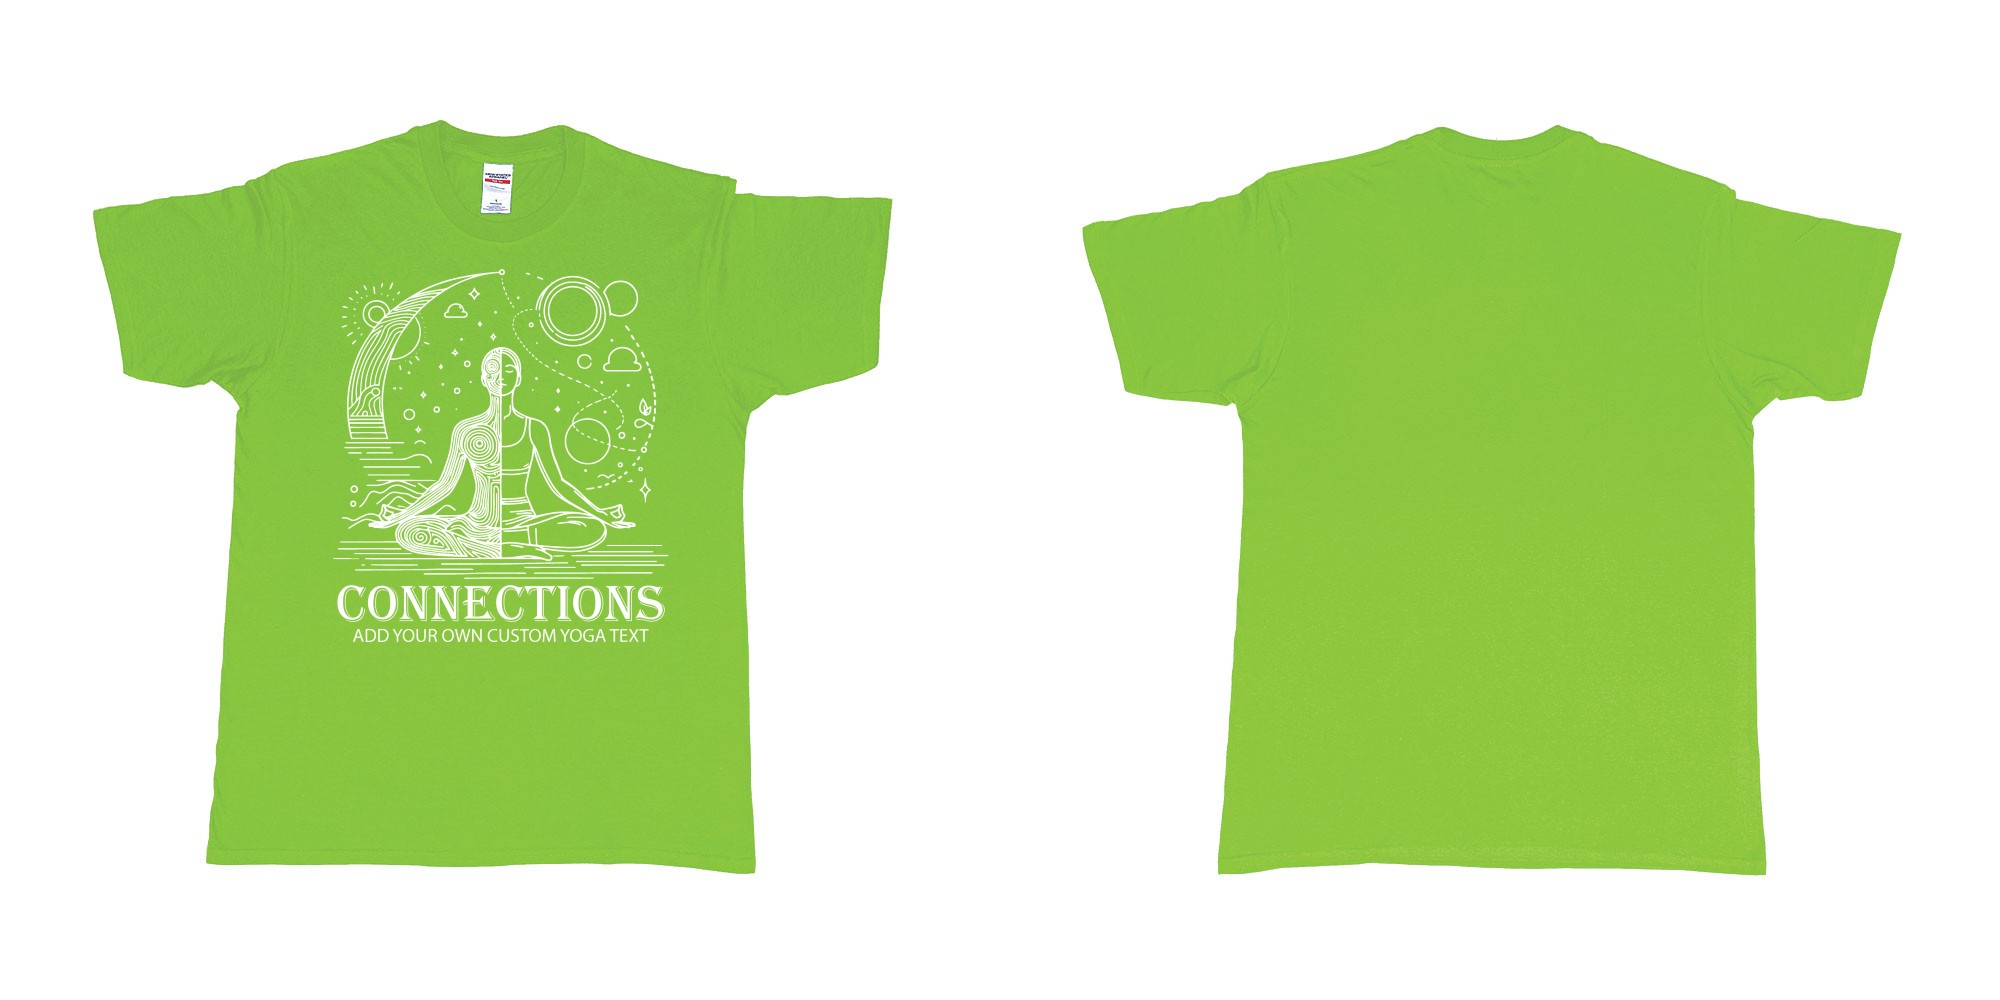 Custom tshirt design yogo connections human moon stars custom bali tshirt printing in fabric color lime choice your own text made in Bali by The Pirate Way